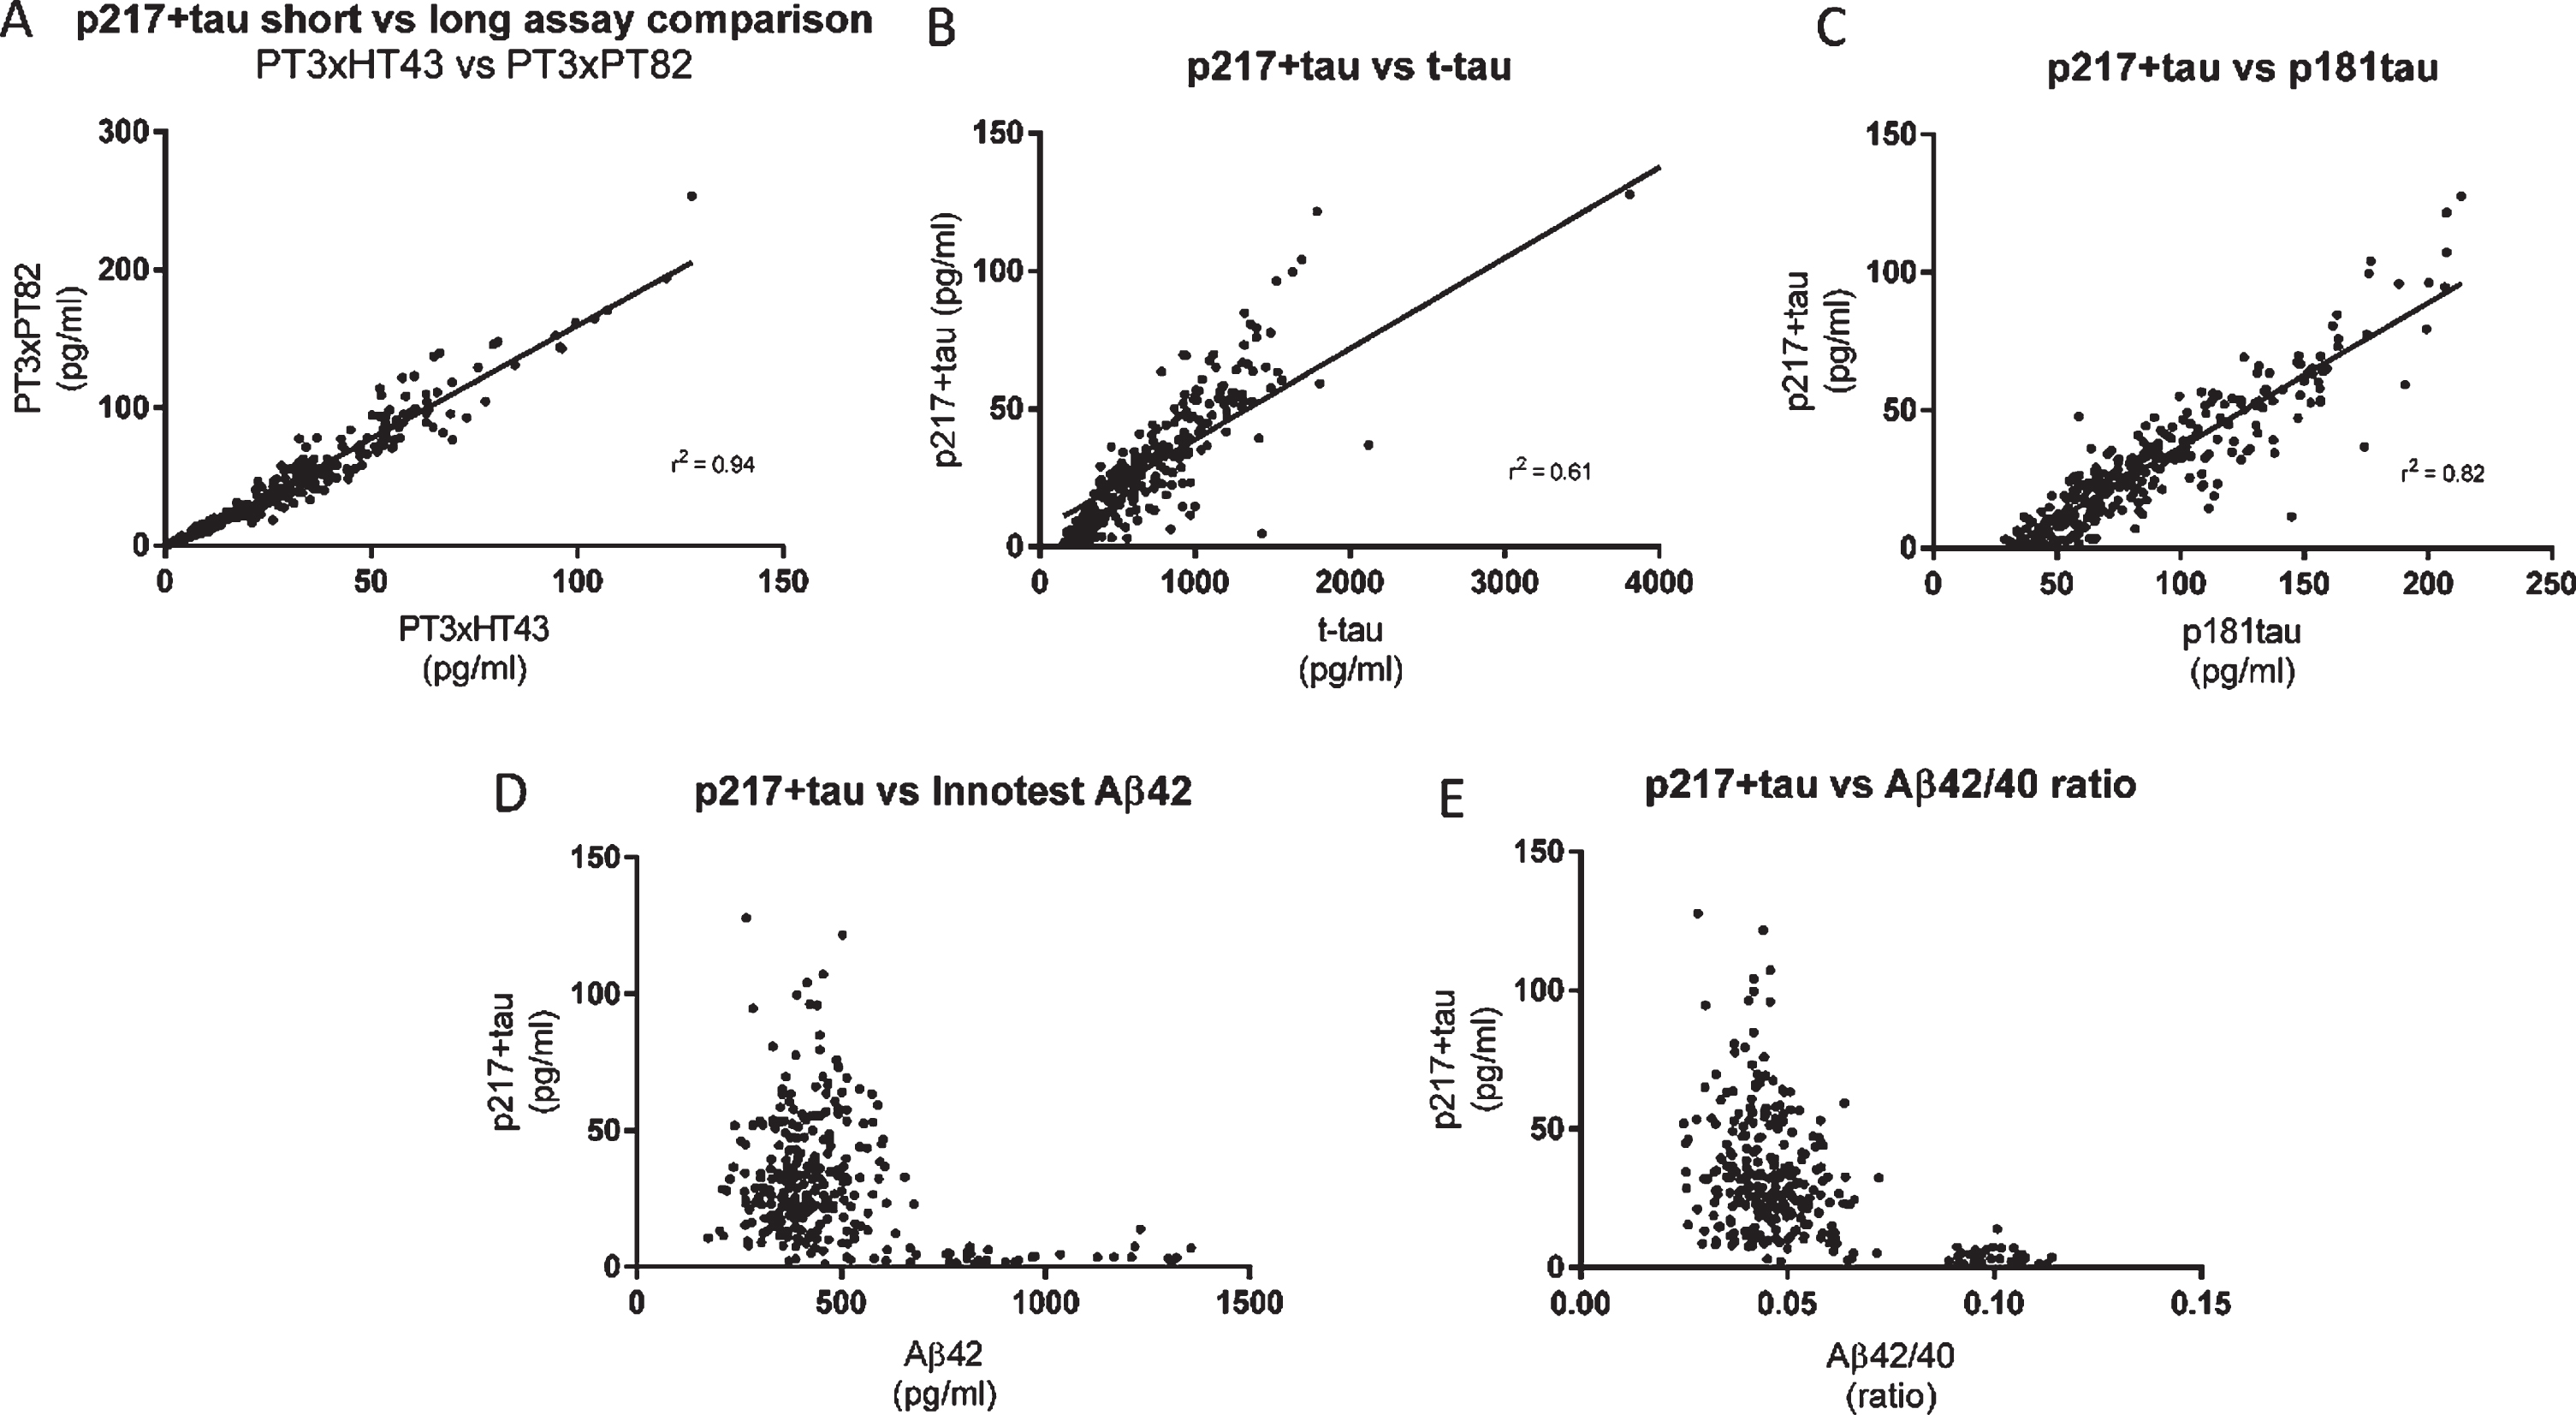 CSF p217 + tau overlaps partially, but is distinct from, Innotest t-tau and p181tau. CSF from subjects with mild-moderate dementia (n = 323 samples) were measured with the indicated assays and evaluated for inter-assay correlation. A) The two p217 + tau assays (PT3×HT43 and PT3×PT82) correlated well. B, C) However the correlation of either assay (data shown here is with PT3×HT43) with classical tau assays Innotest hTauAG or Innotest p181tau was less pronounced. D, E) While p217 + tau (here shown with PT3HT43 assay) is higher in amyloid positive subjects (Aβ42 < 600 pg/ml, or Aβ42/40 ratio < 0.09) versus negative subjects, there is no correlation with absolute Aβ42 levels or ratio when looking within amyloid positive or negative groups.